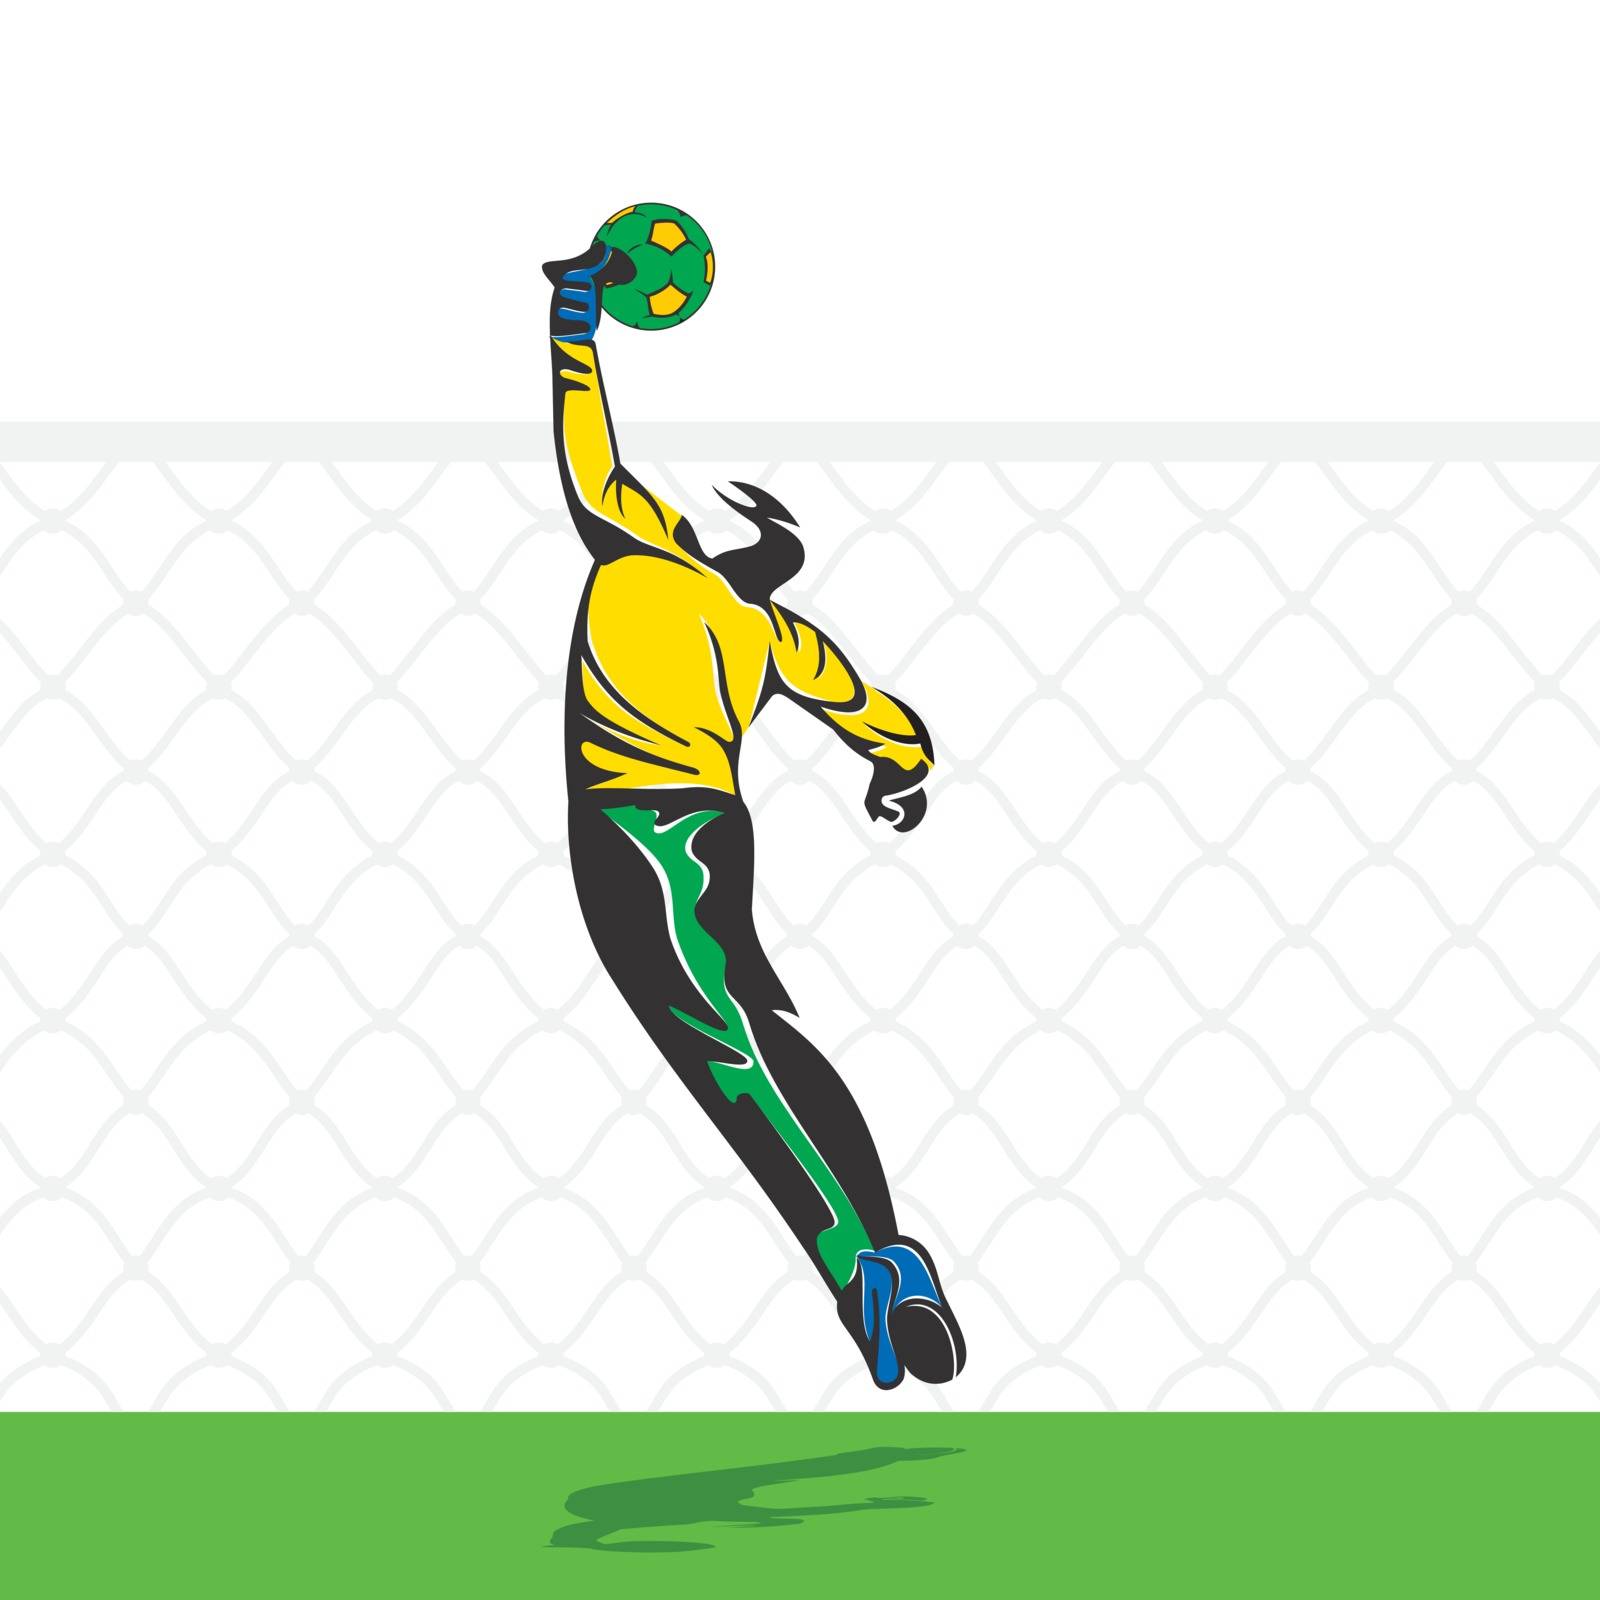 goal keeper save the goal concept by vectoraart